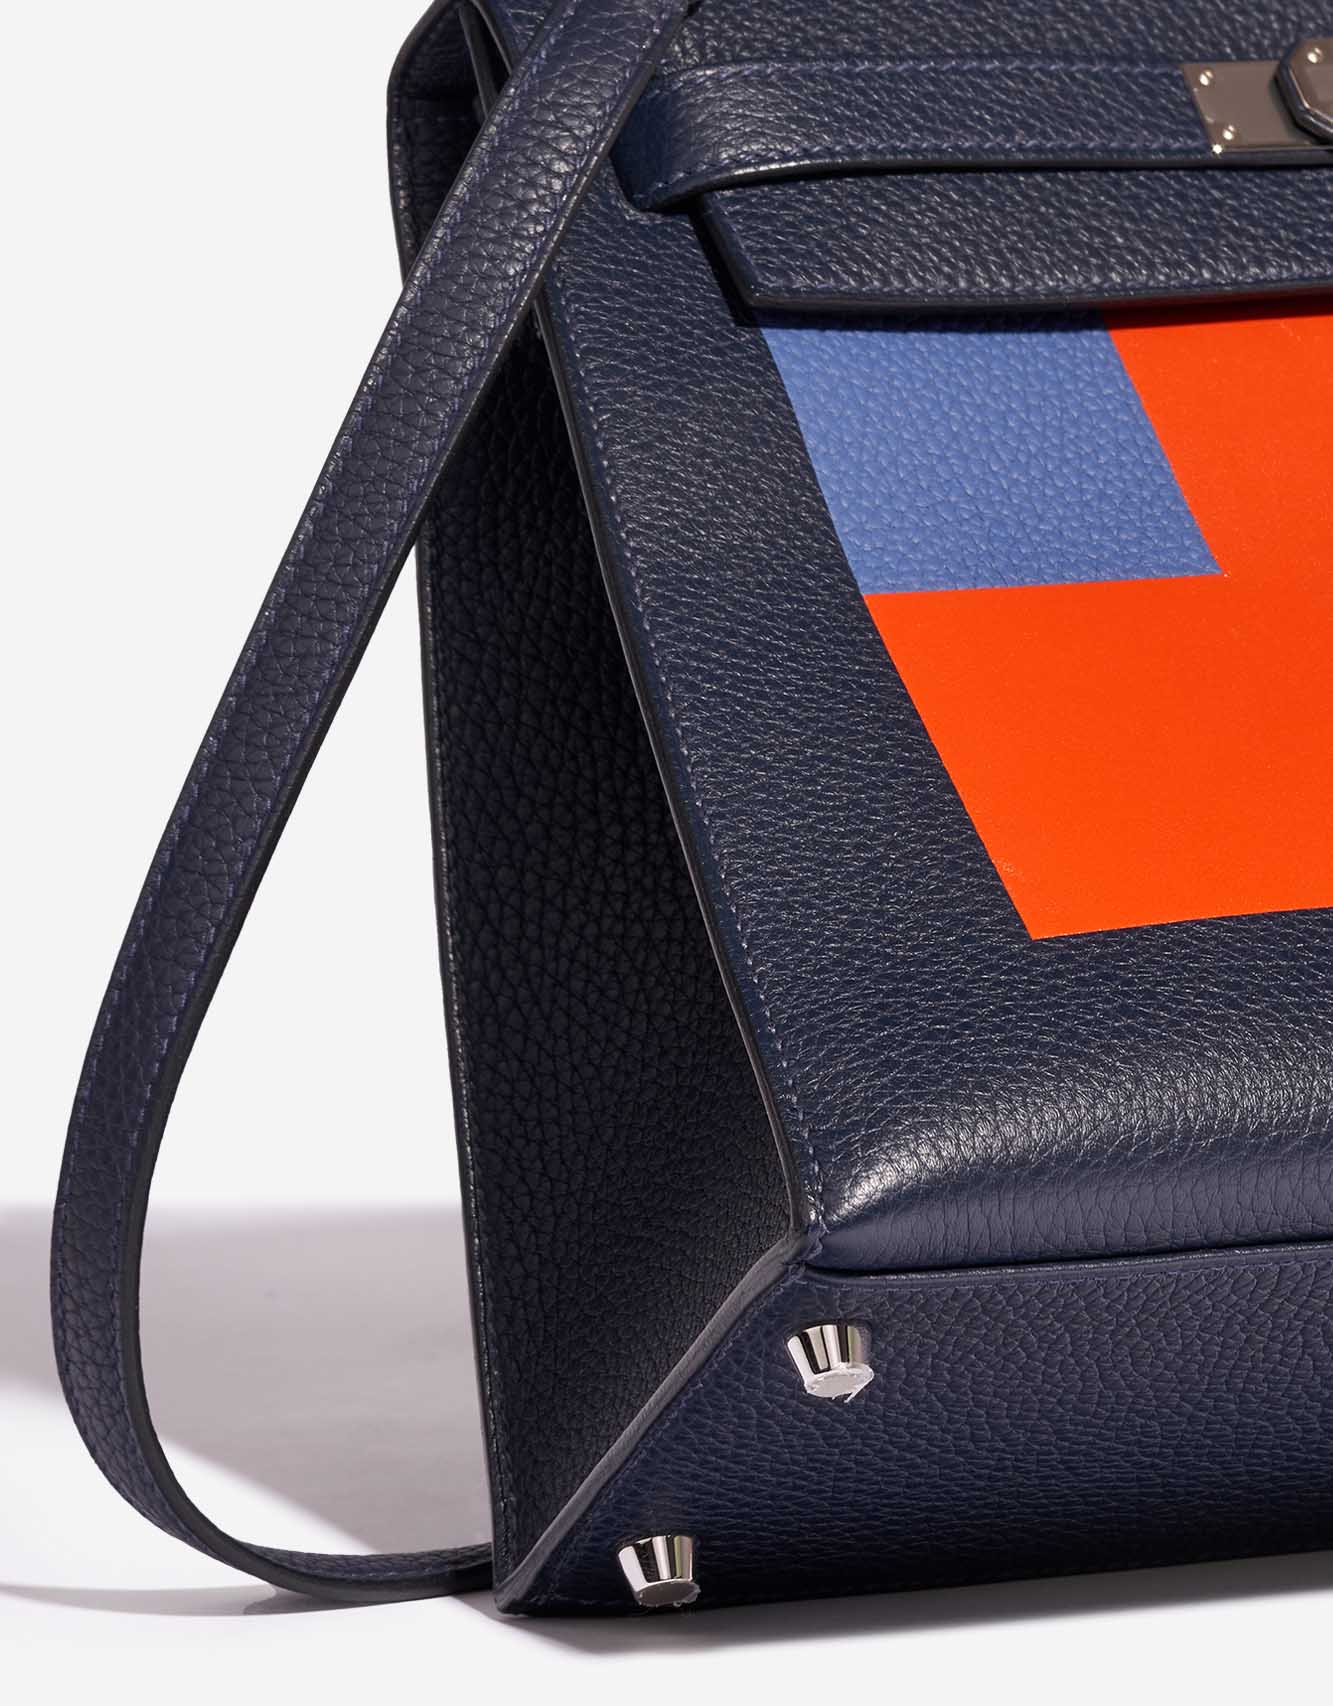 How to Clean Your Hermès Bag: Leather Care Tips